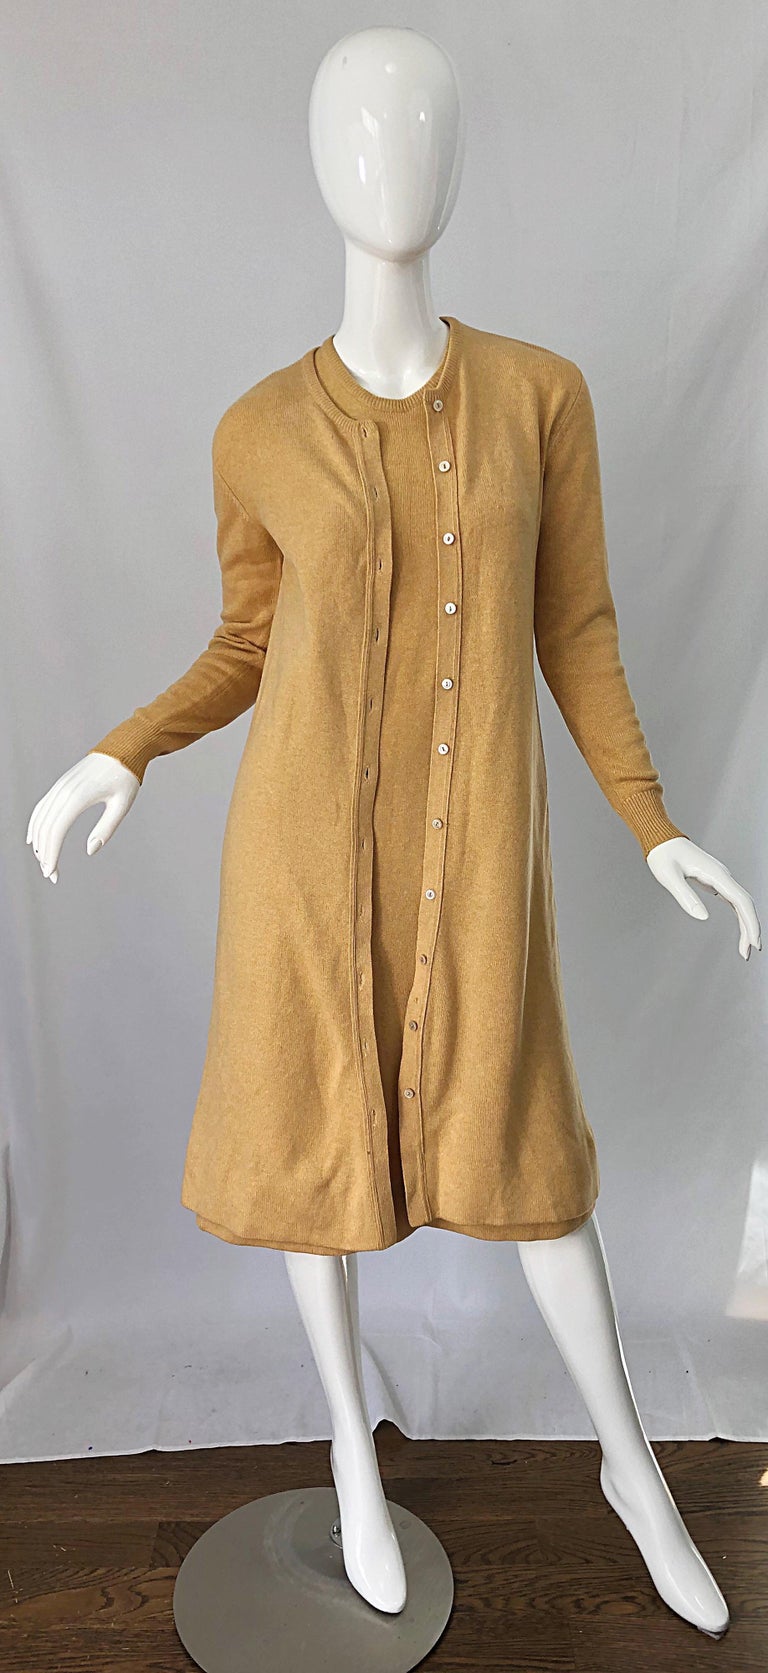 Women's 1970s HALSTON Cashmere Camel Tan 70s Vintage Dress and Cardigan Sweater Jacket For Sale